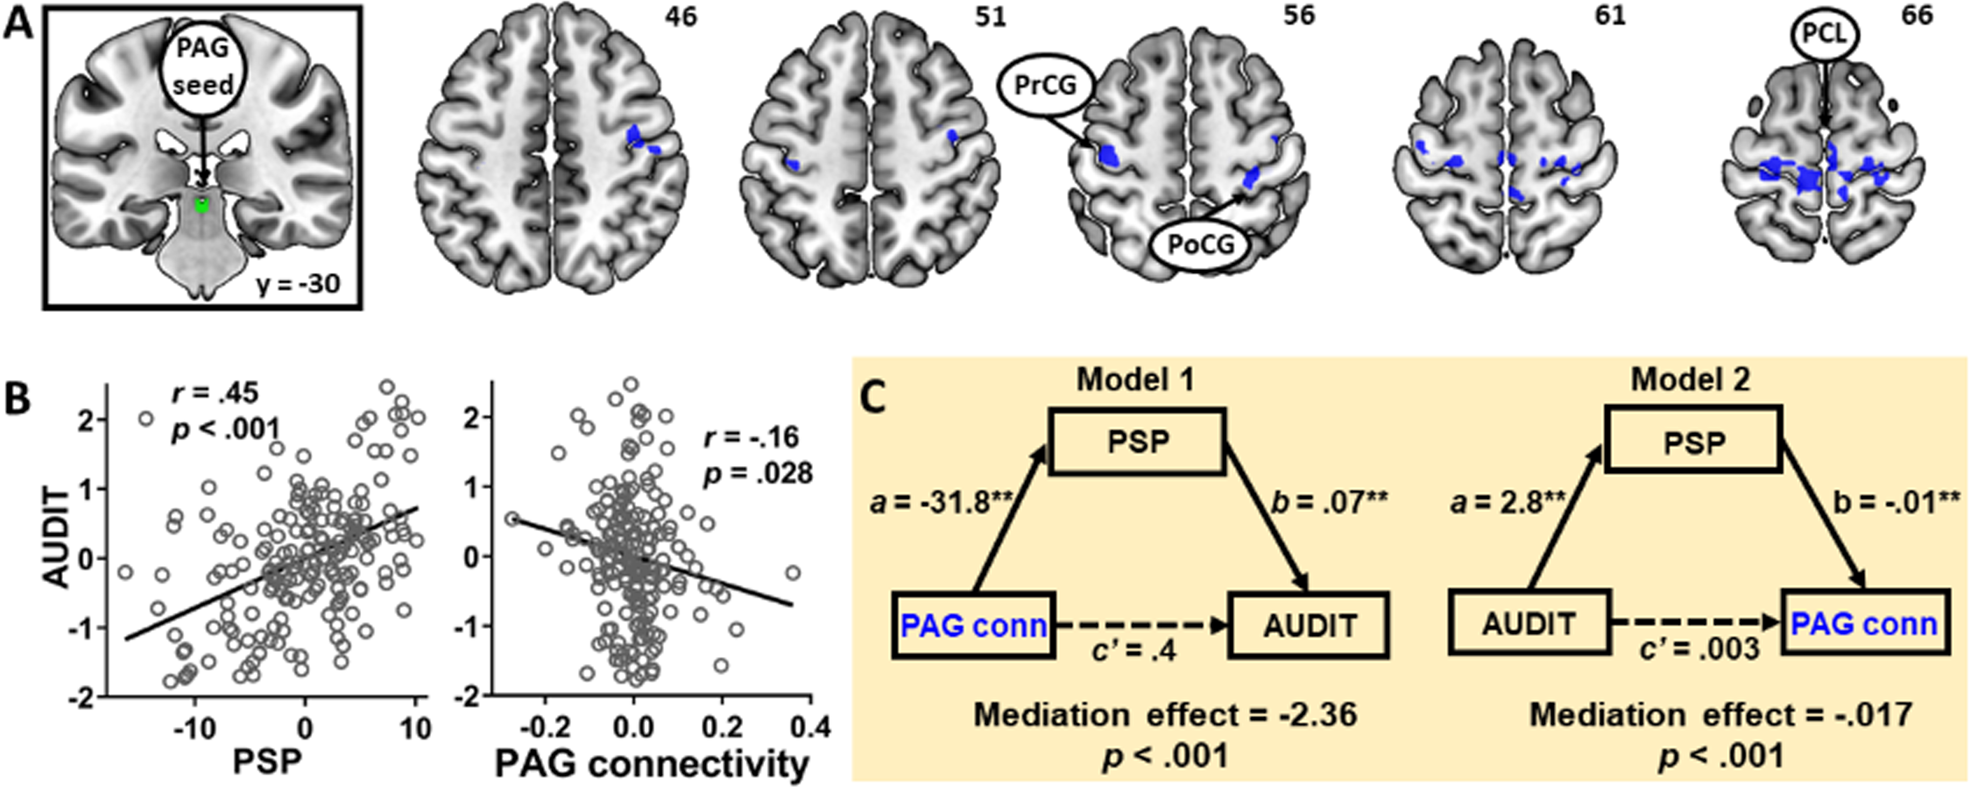 Pain and reward circuits antagonistically modulate alcohol expectancy to  regulate drinking | Translational Psychiatry